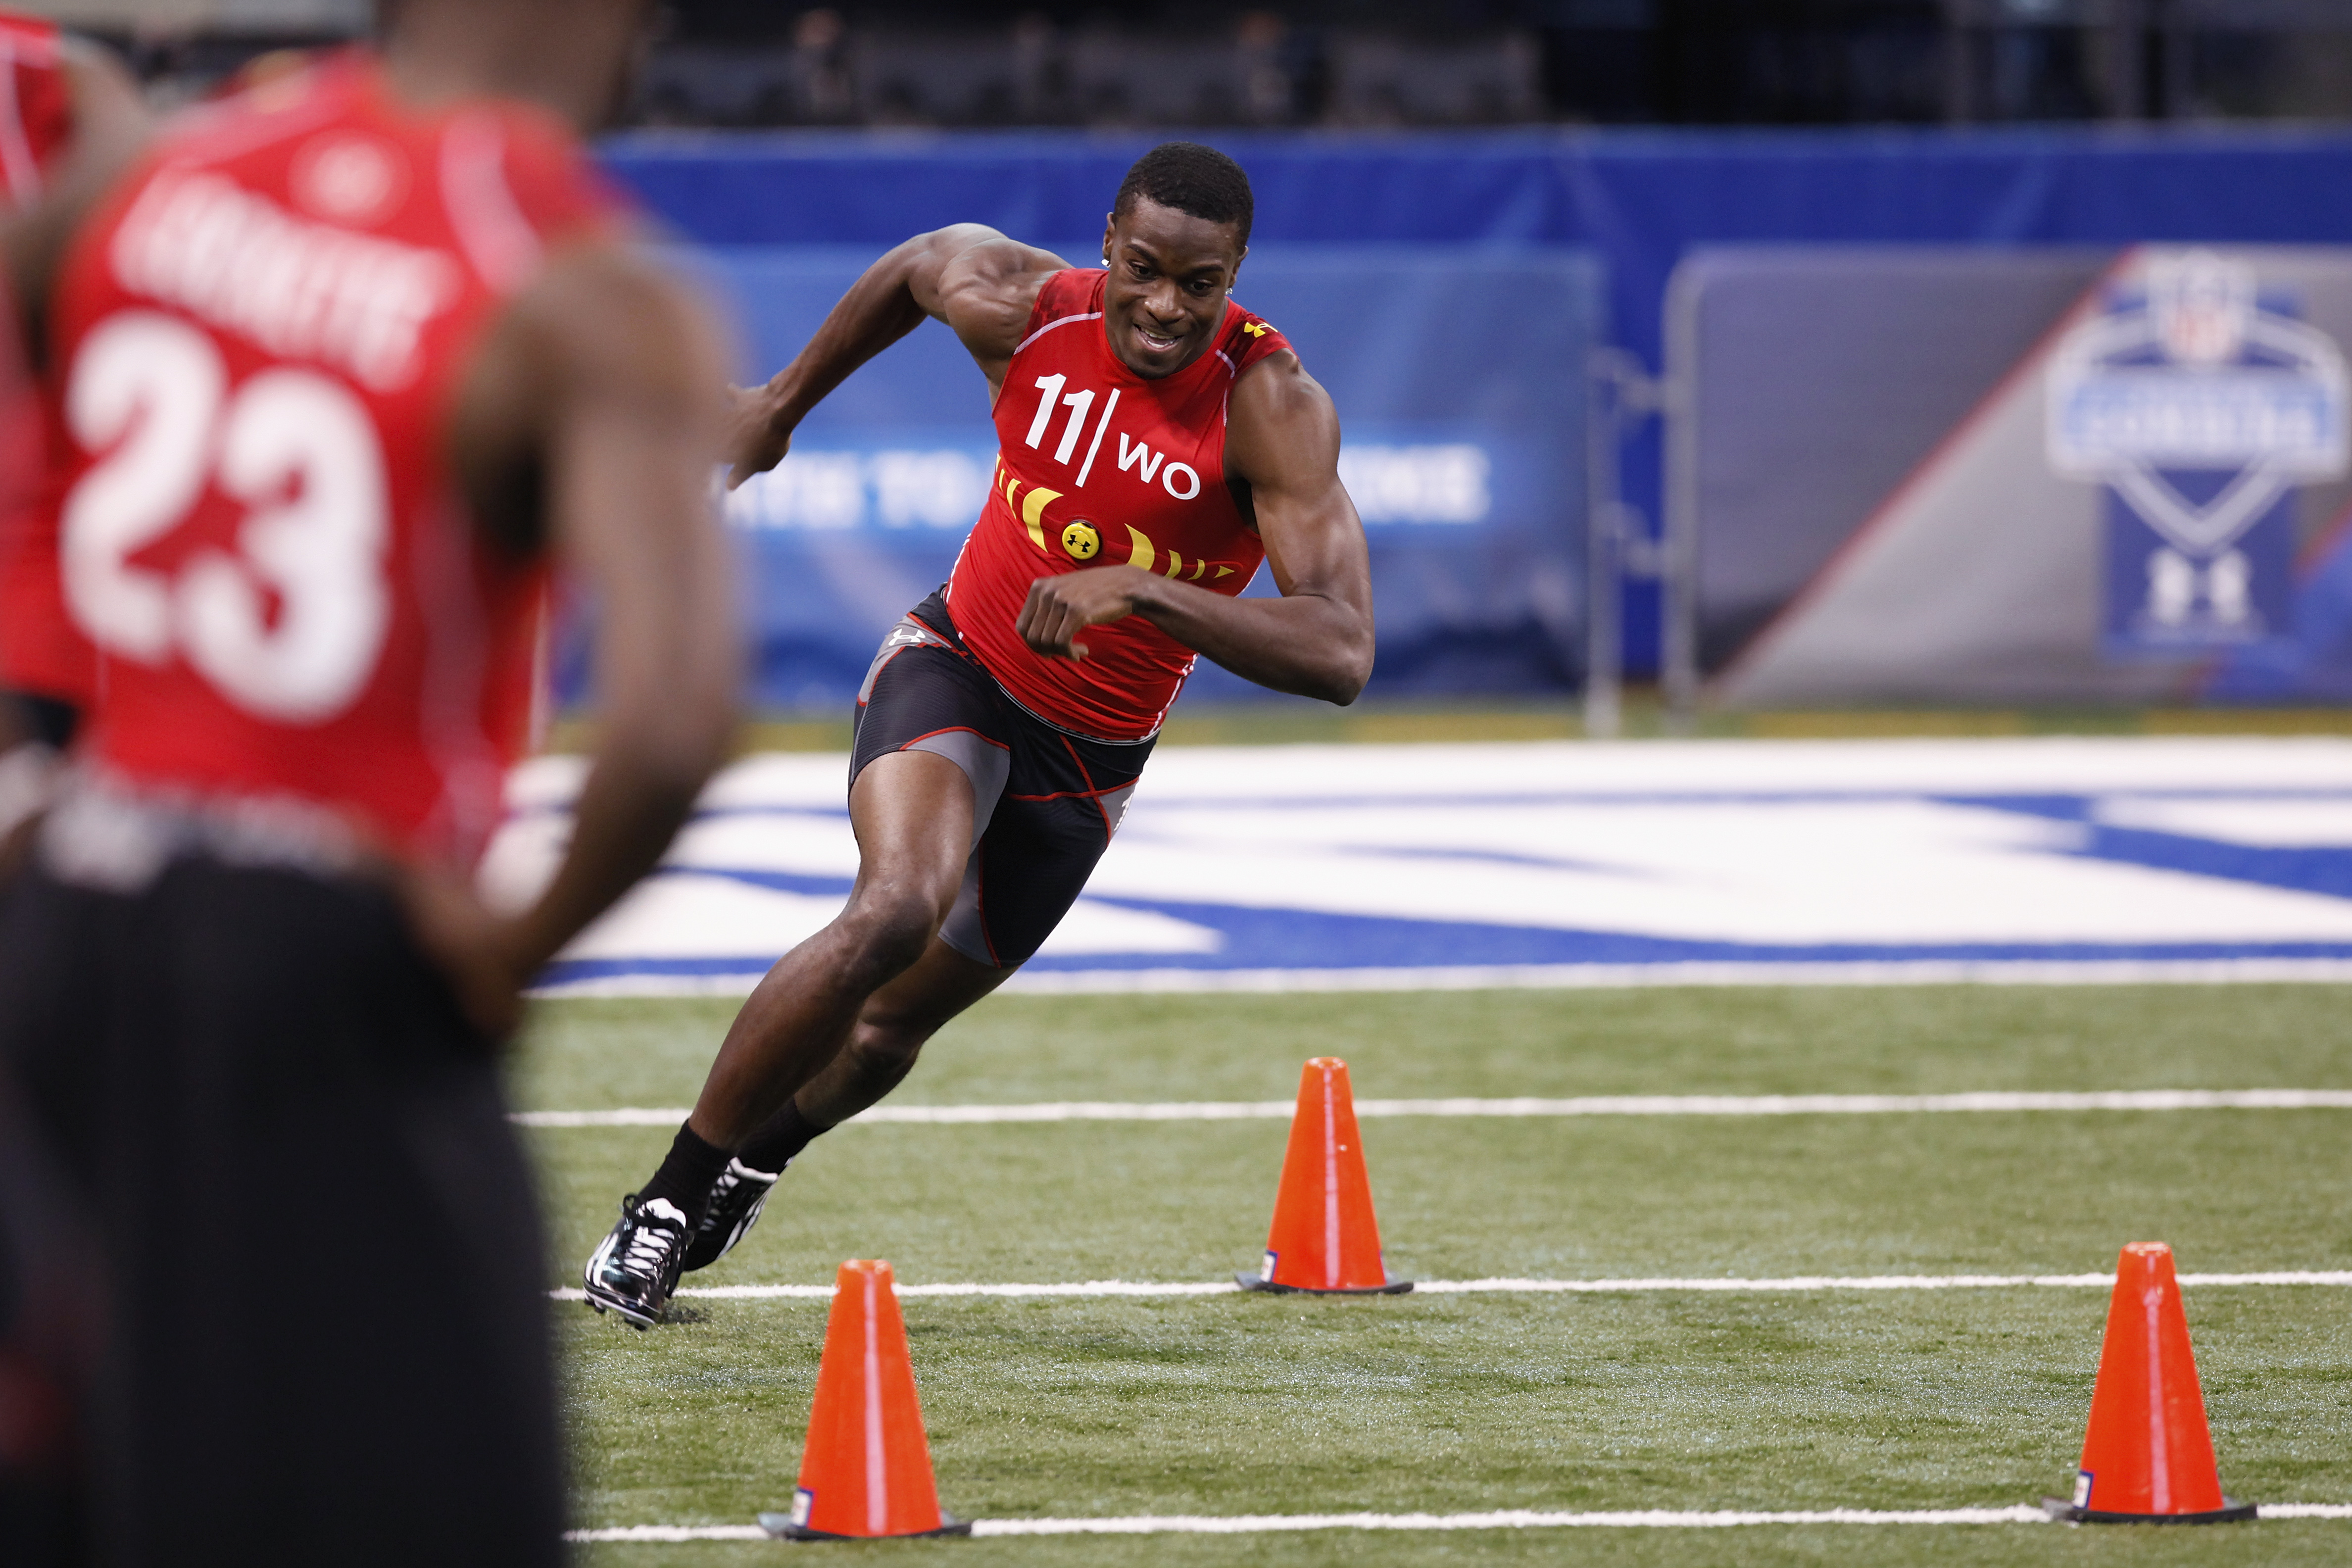 Nfl Combine 2011 Results Julio Jones And 10 Pro Prospects